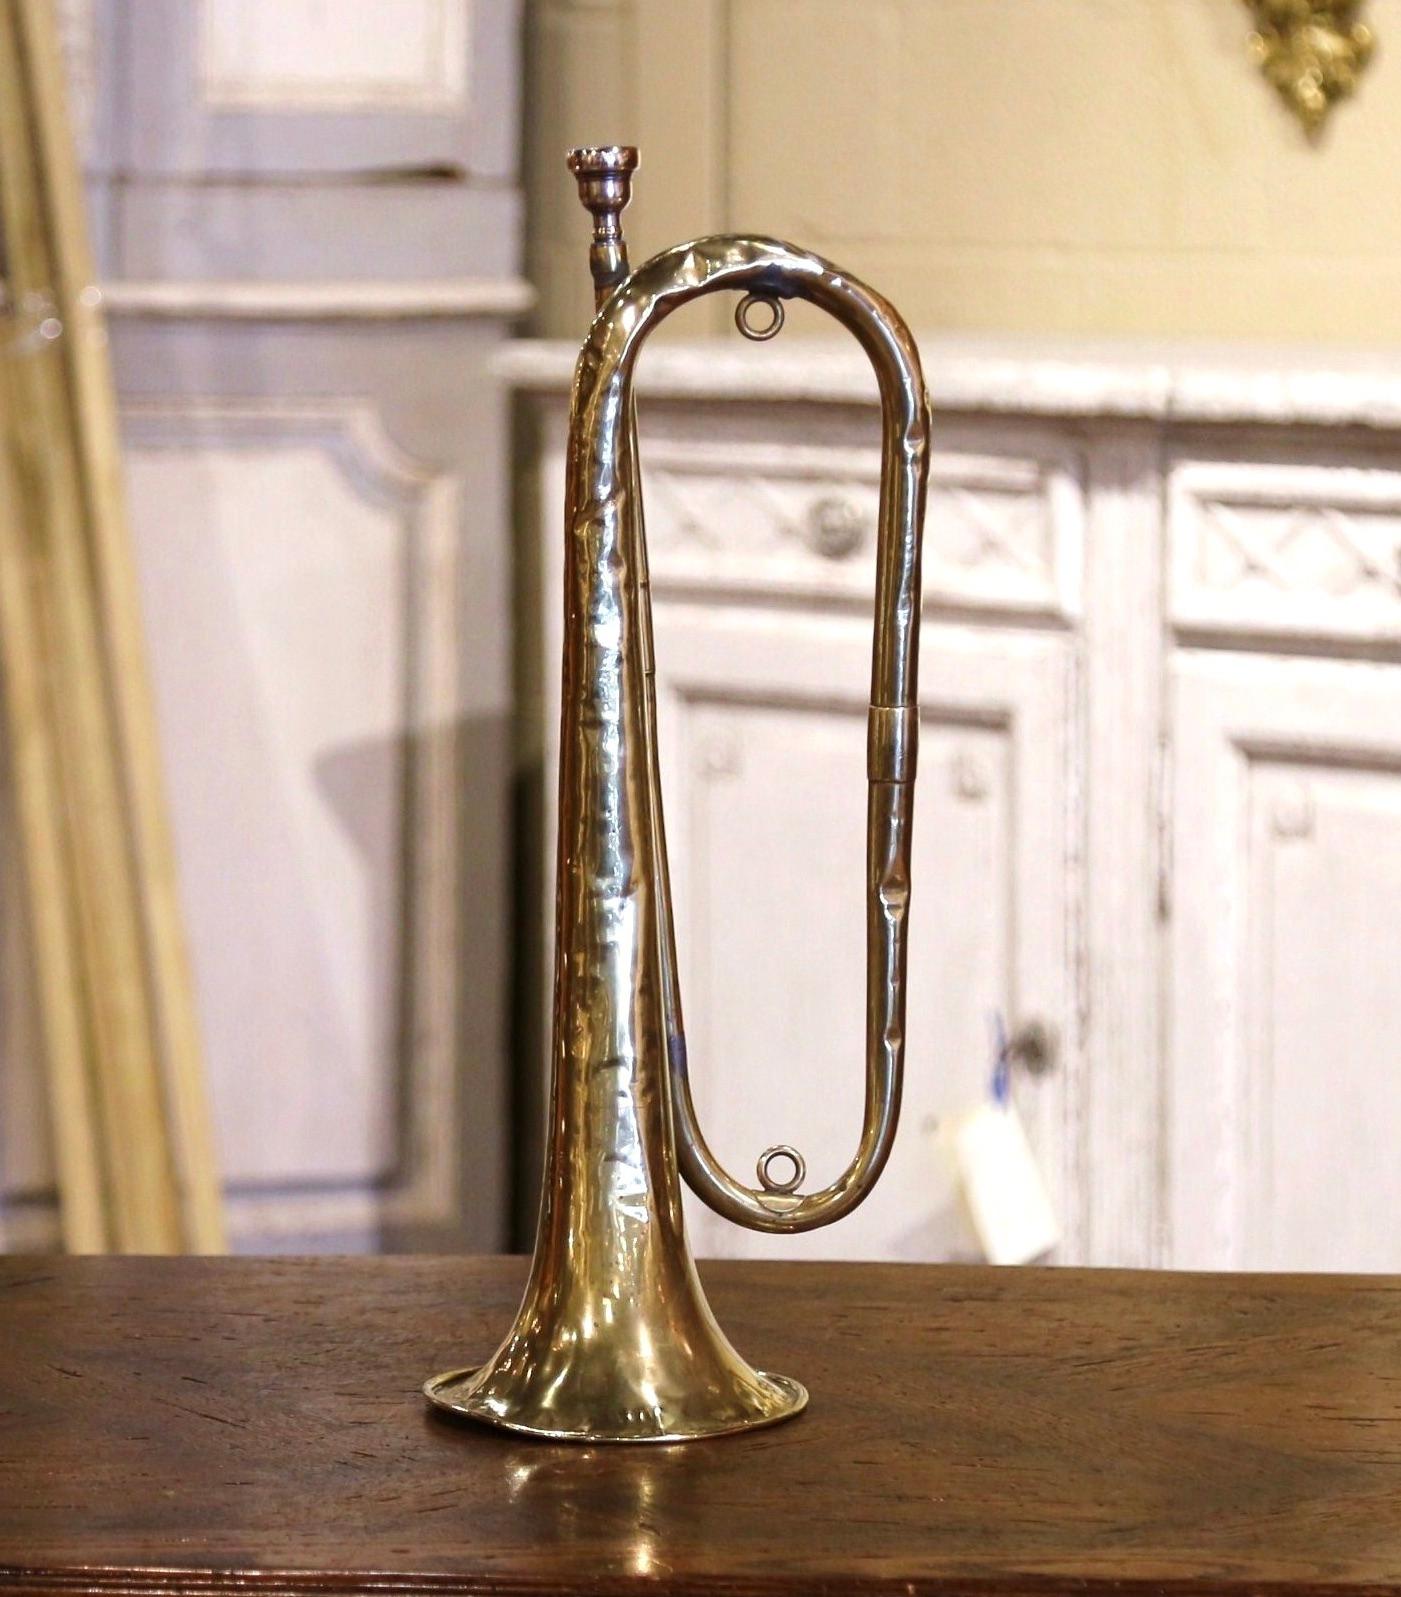 lafayette trumpet made by couesnon paris